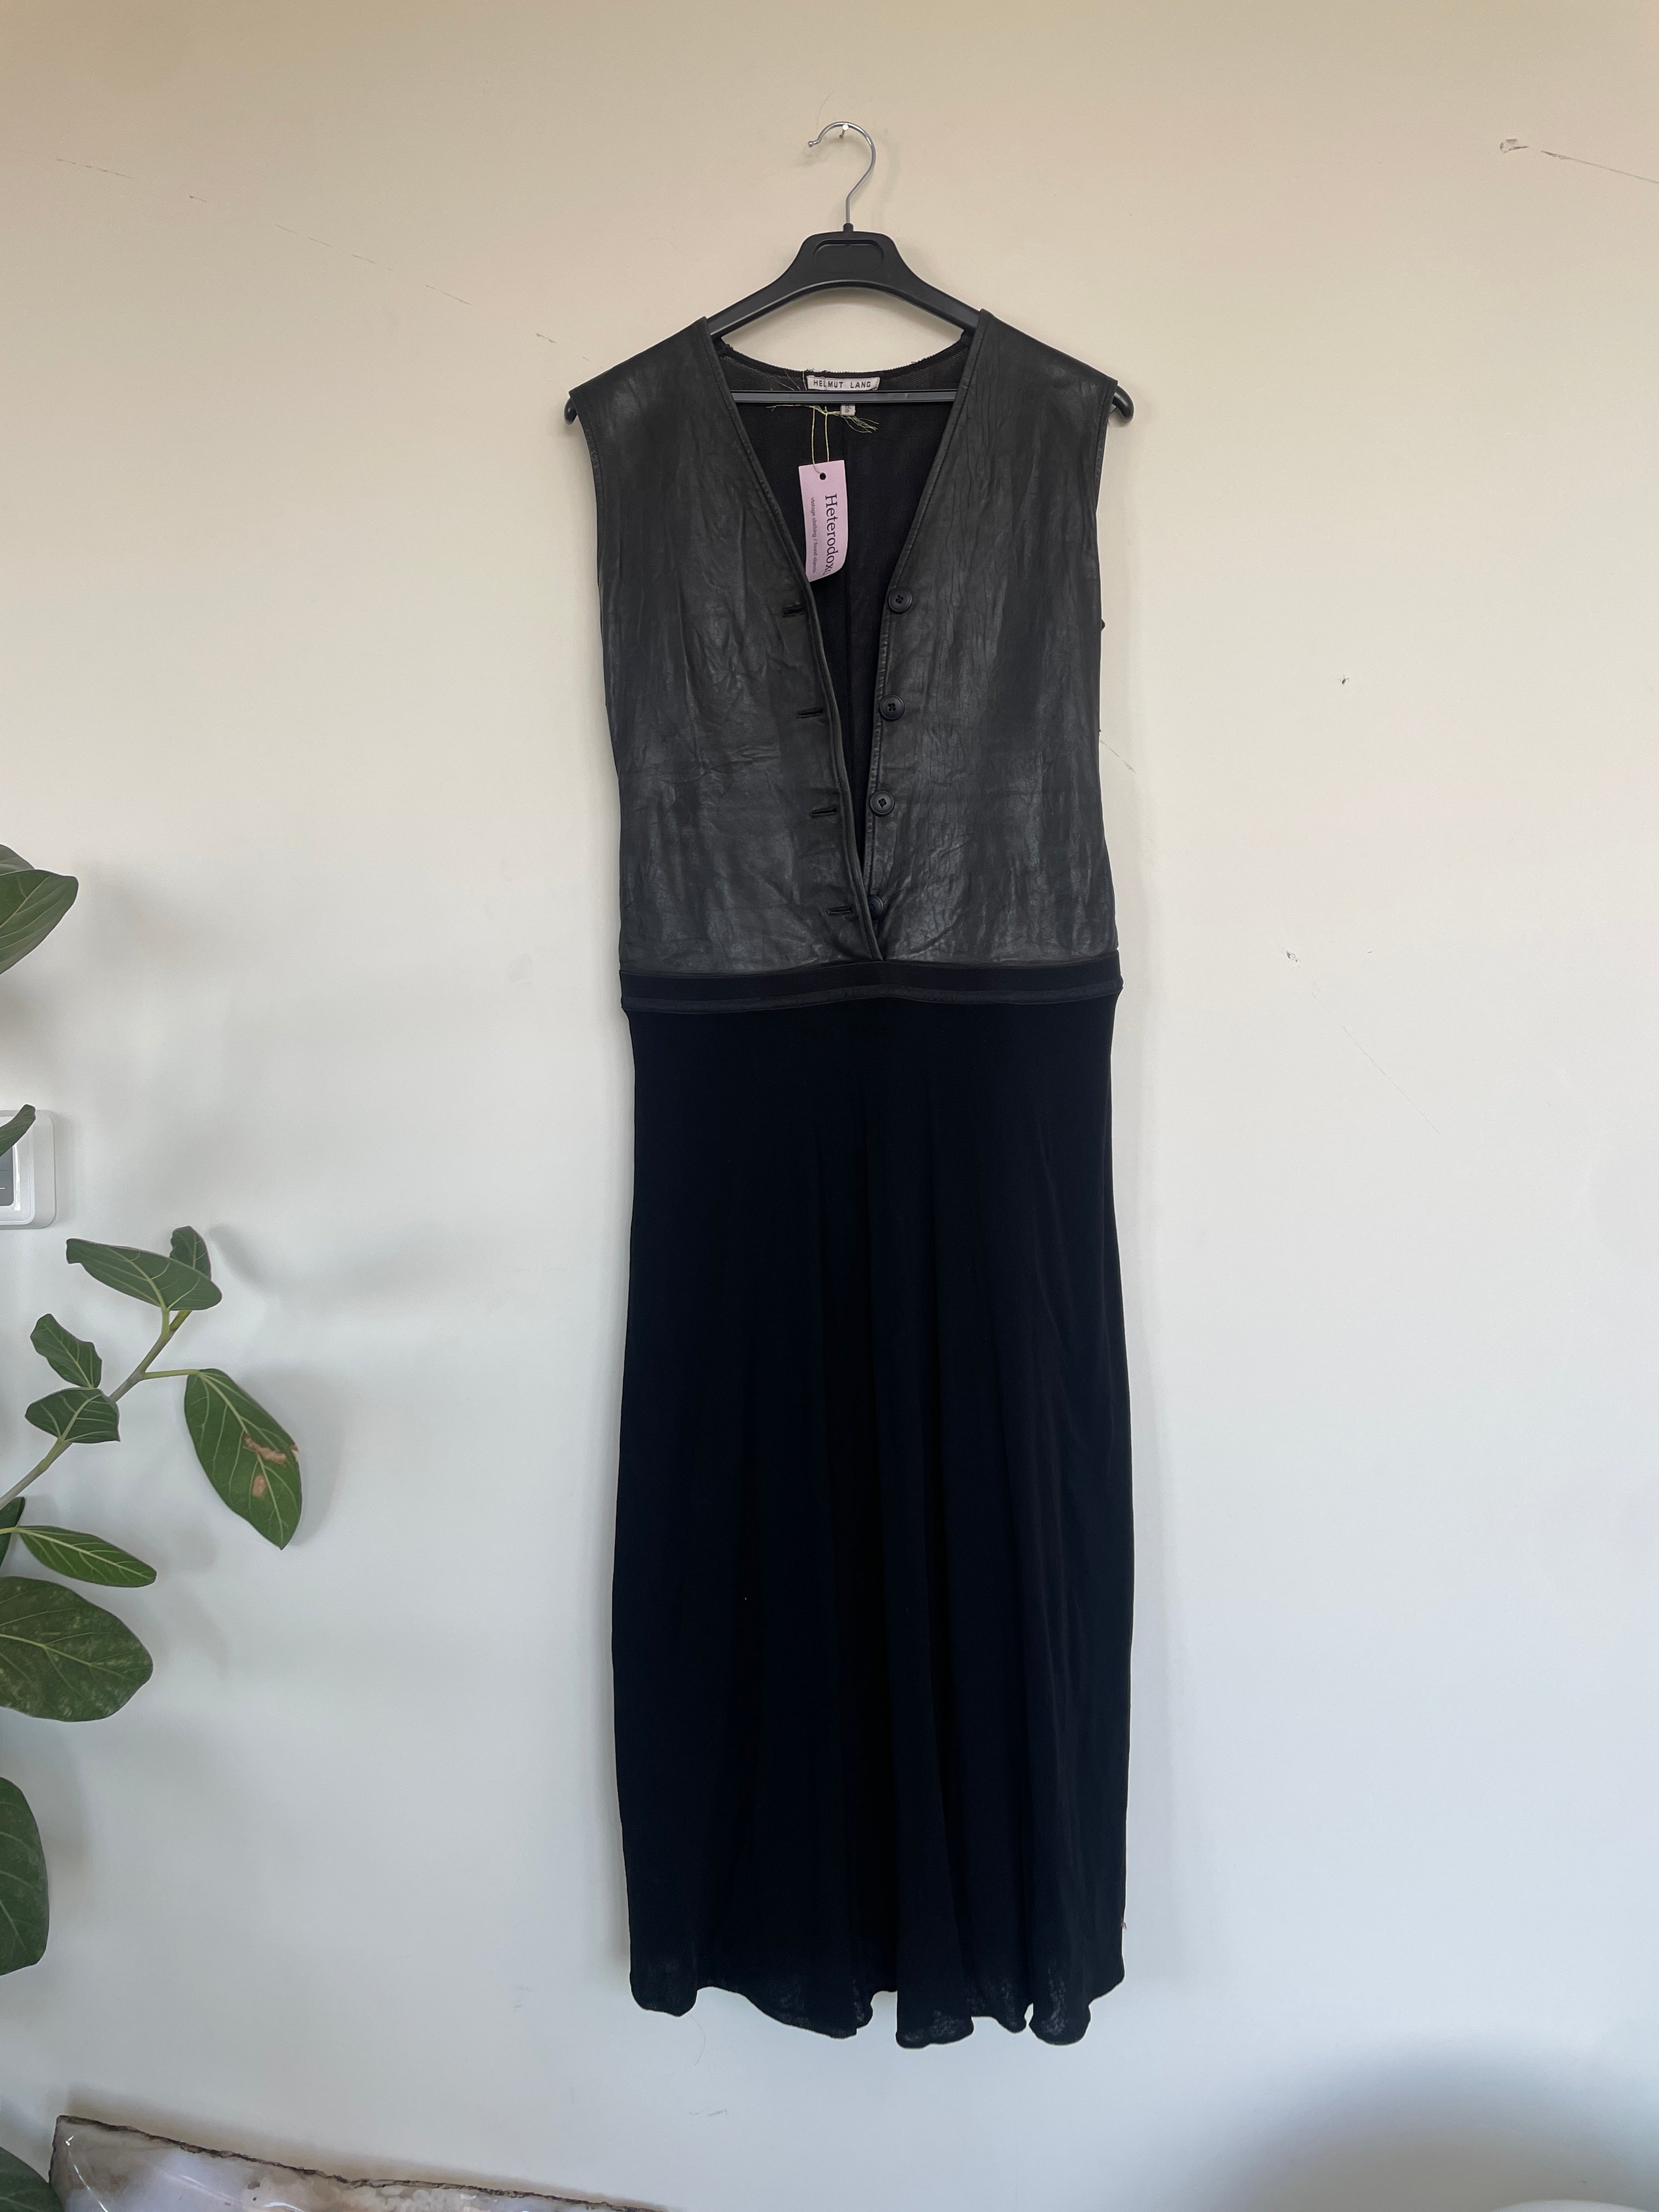 Helmut Lang 90's rare dress with leather top and stretchy skirt